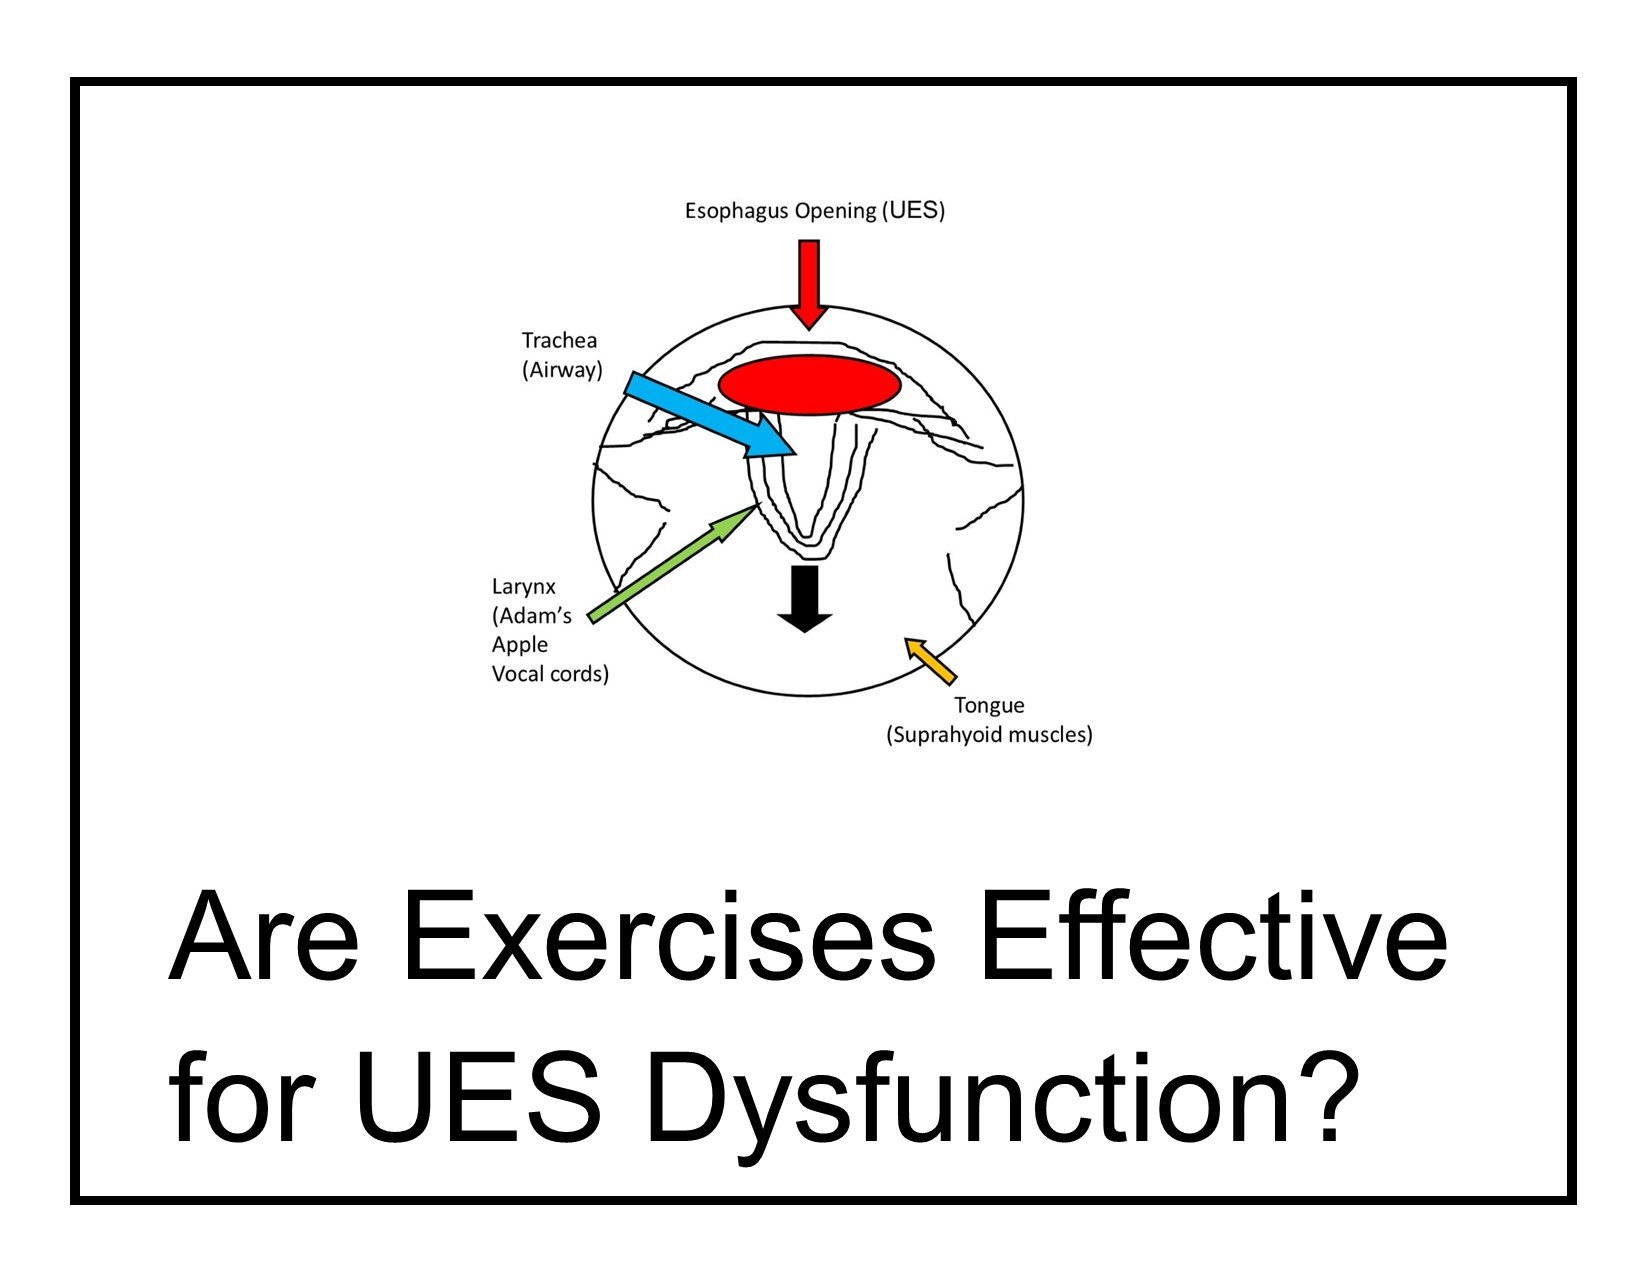 Are Exercises Effective for UES Dysfunction?